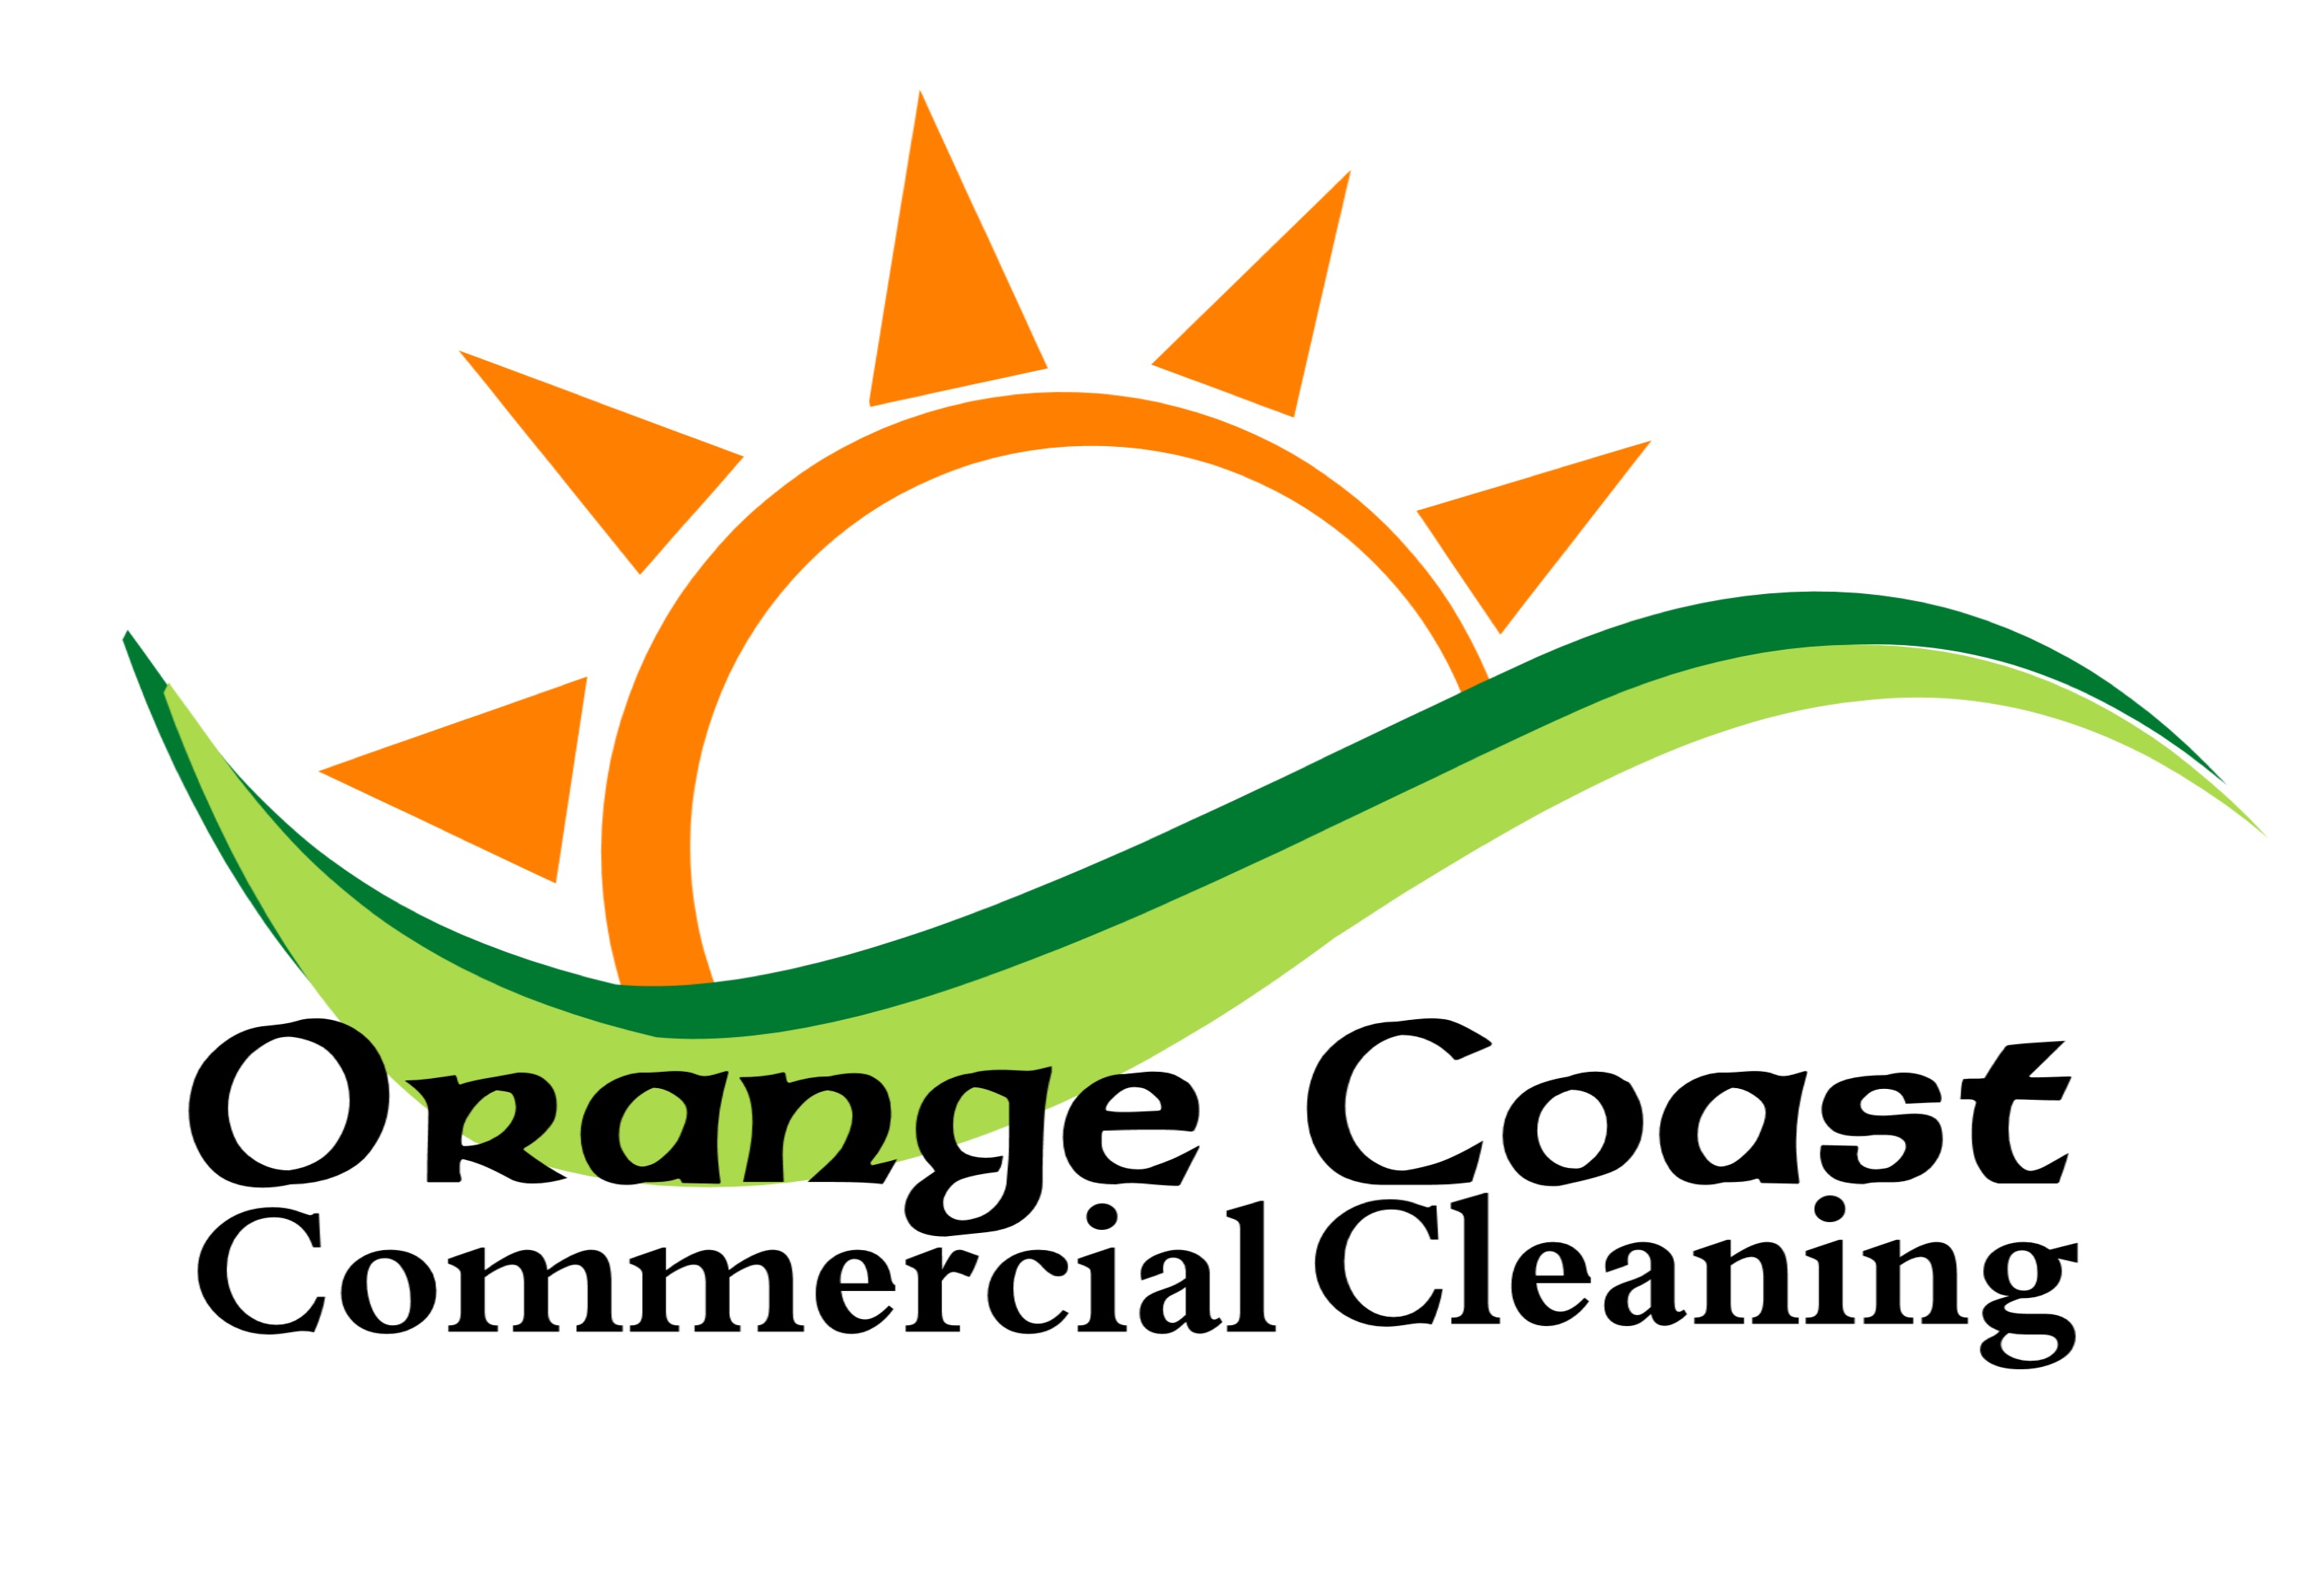 Orange Coast Commercial Cleaning-Unlicensed Contractor Logo